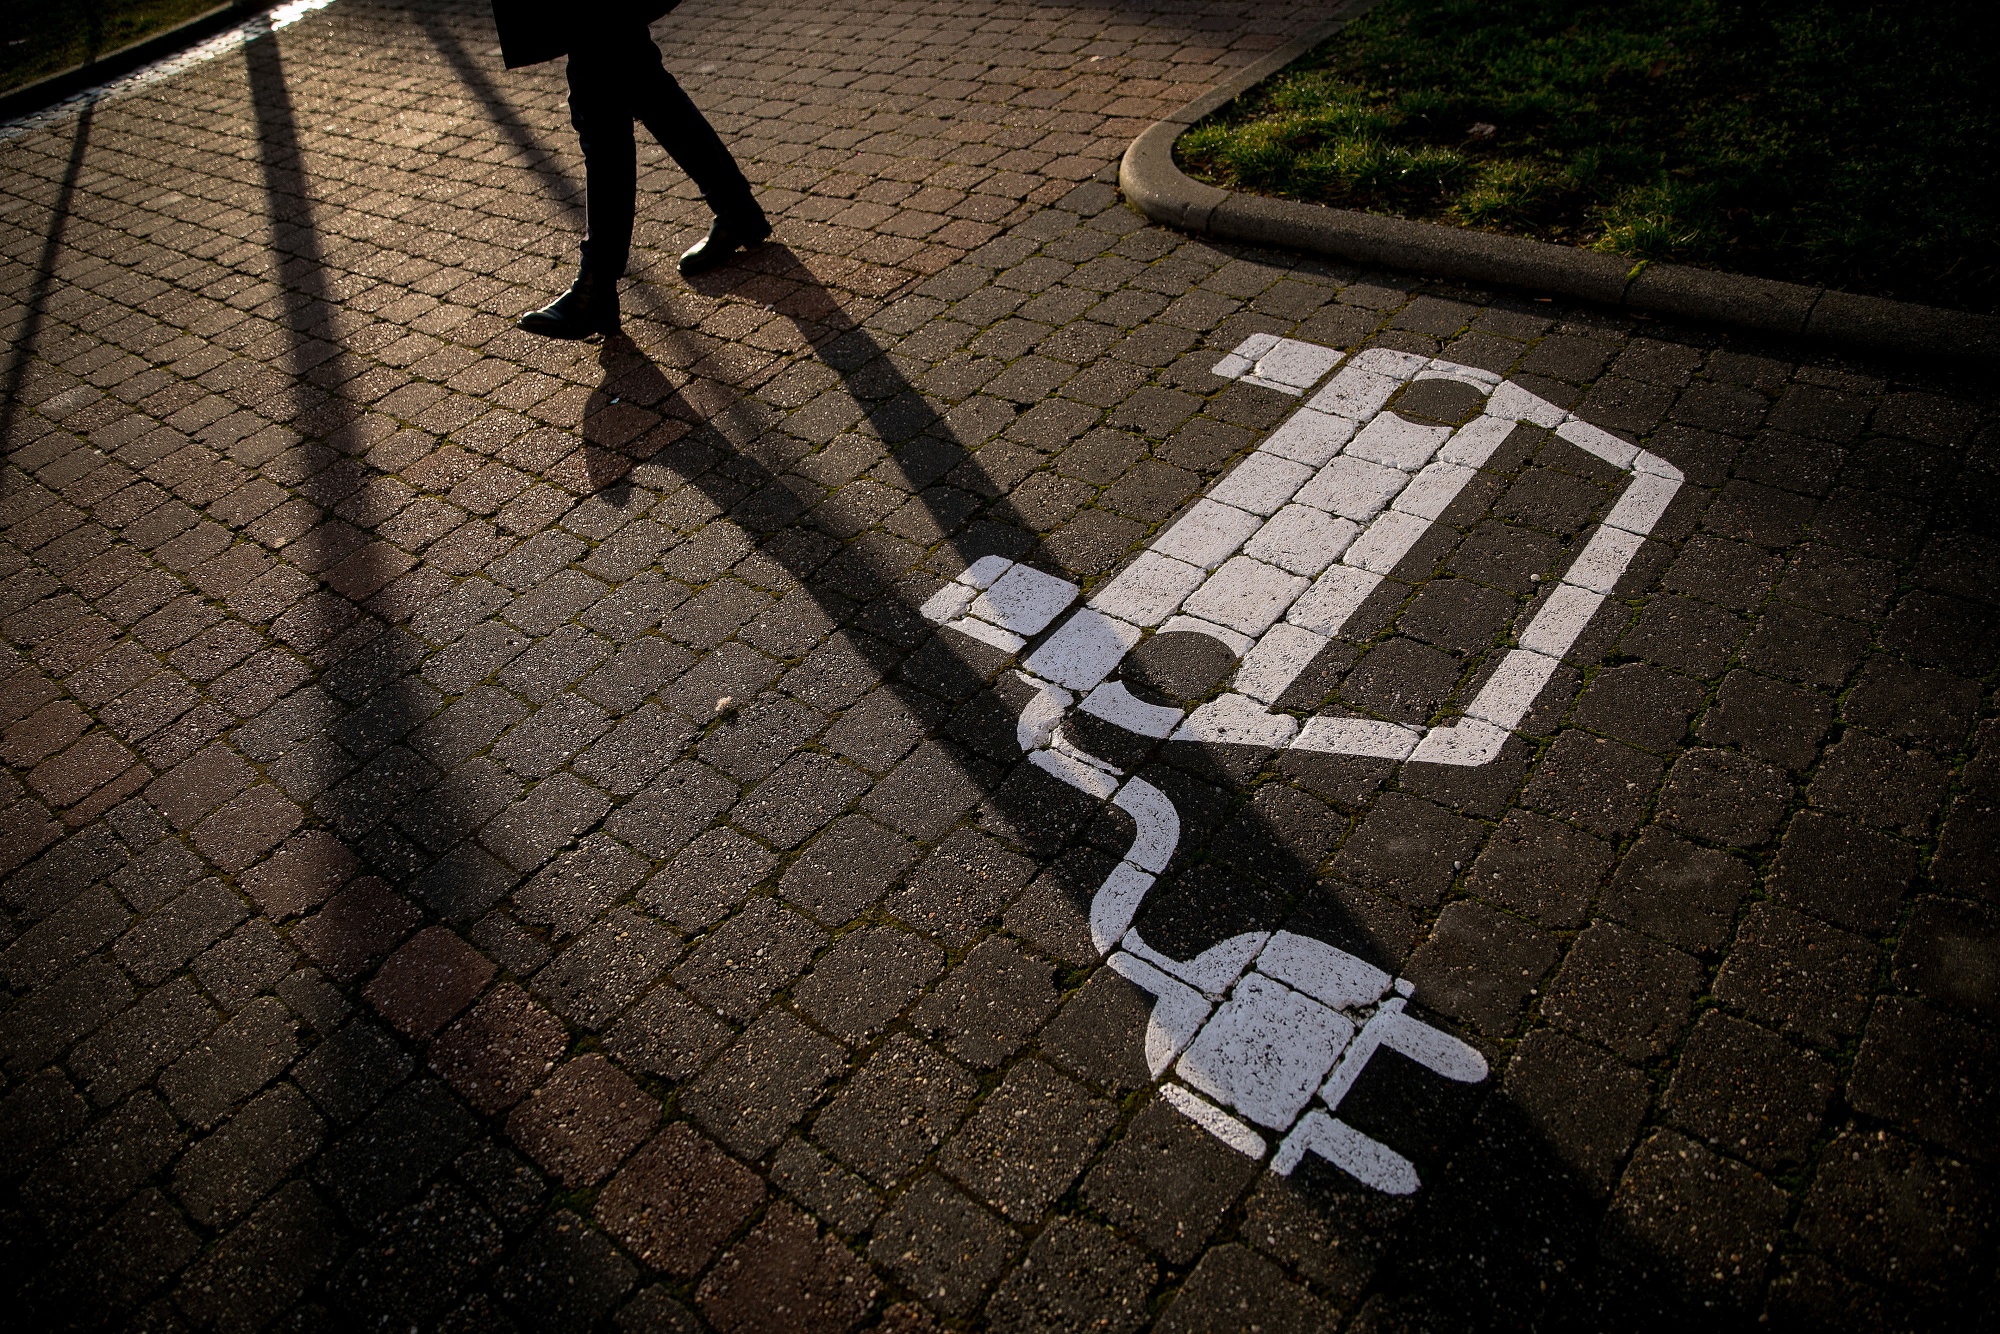 A pedestrian passes an empty electric vehicle charge&nbsp;space in a parking lot&nbsp;in Gruenheide, Germany.